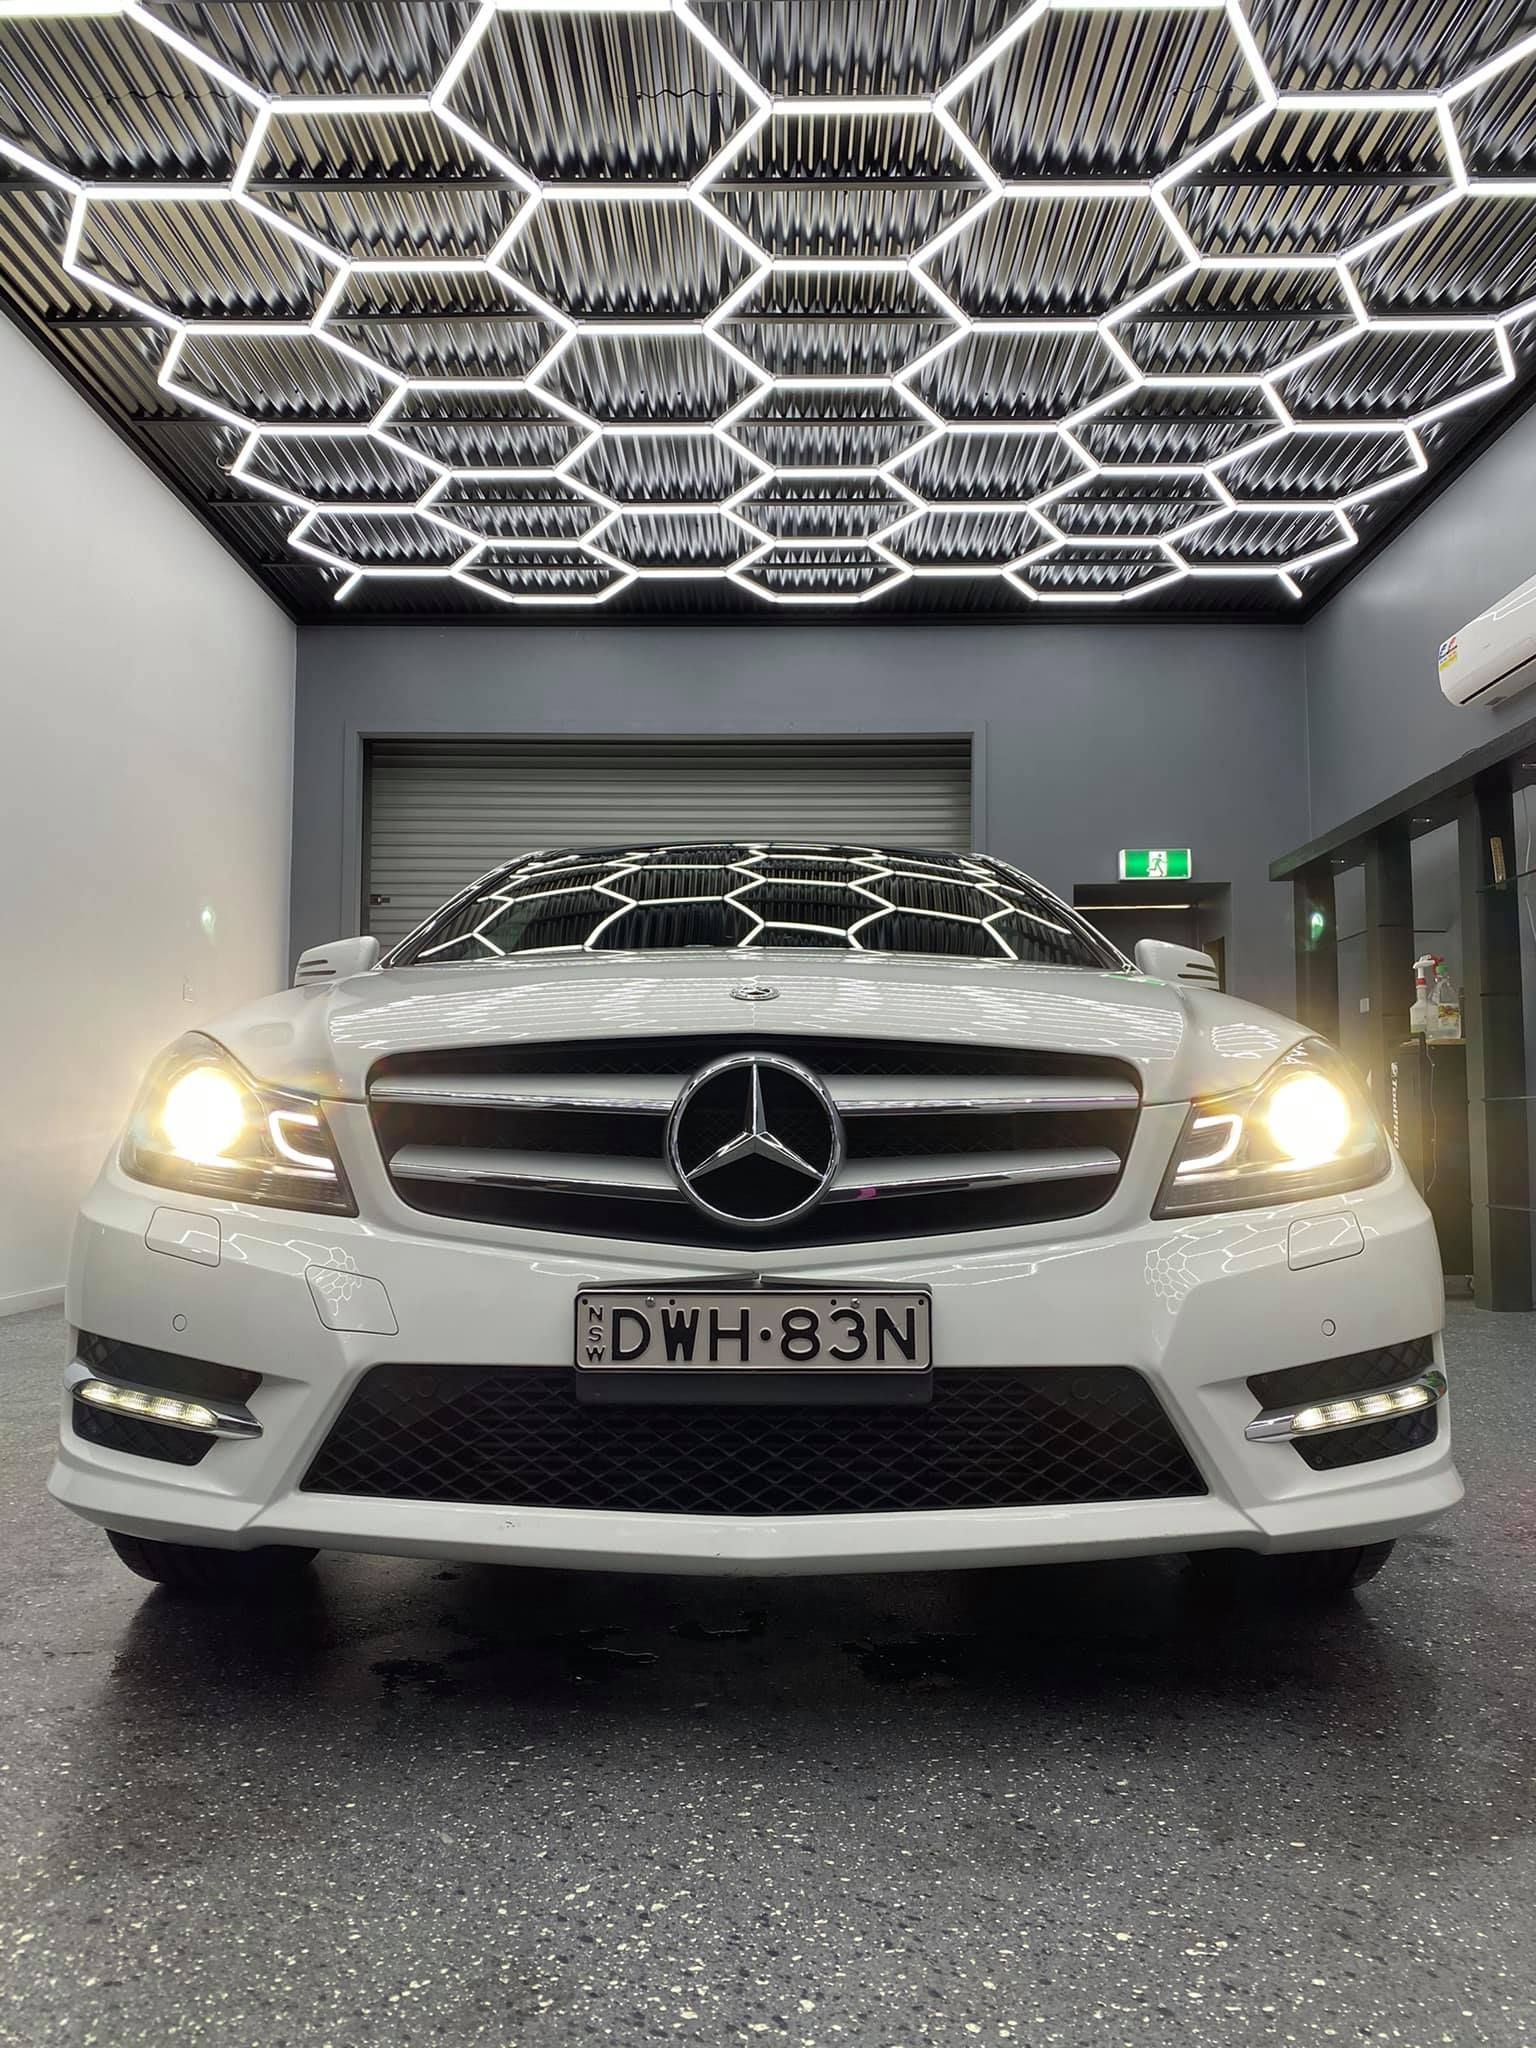 Pristinely cleaned Mercedes in professional detailing garage — Car Detailer in Newcastle